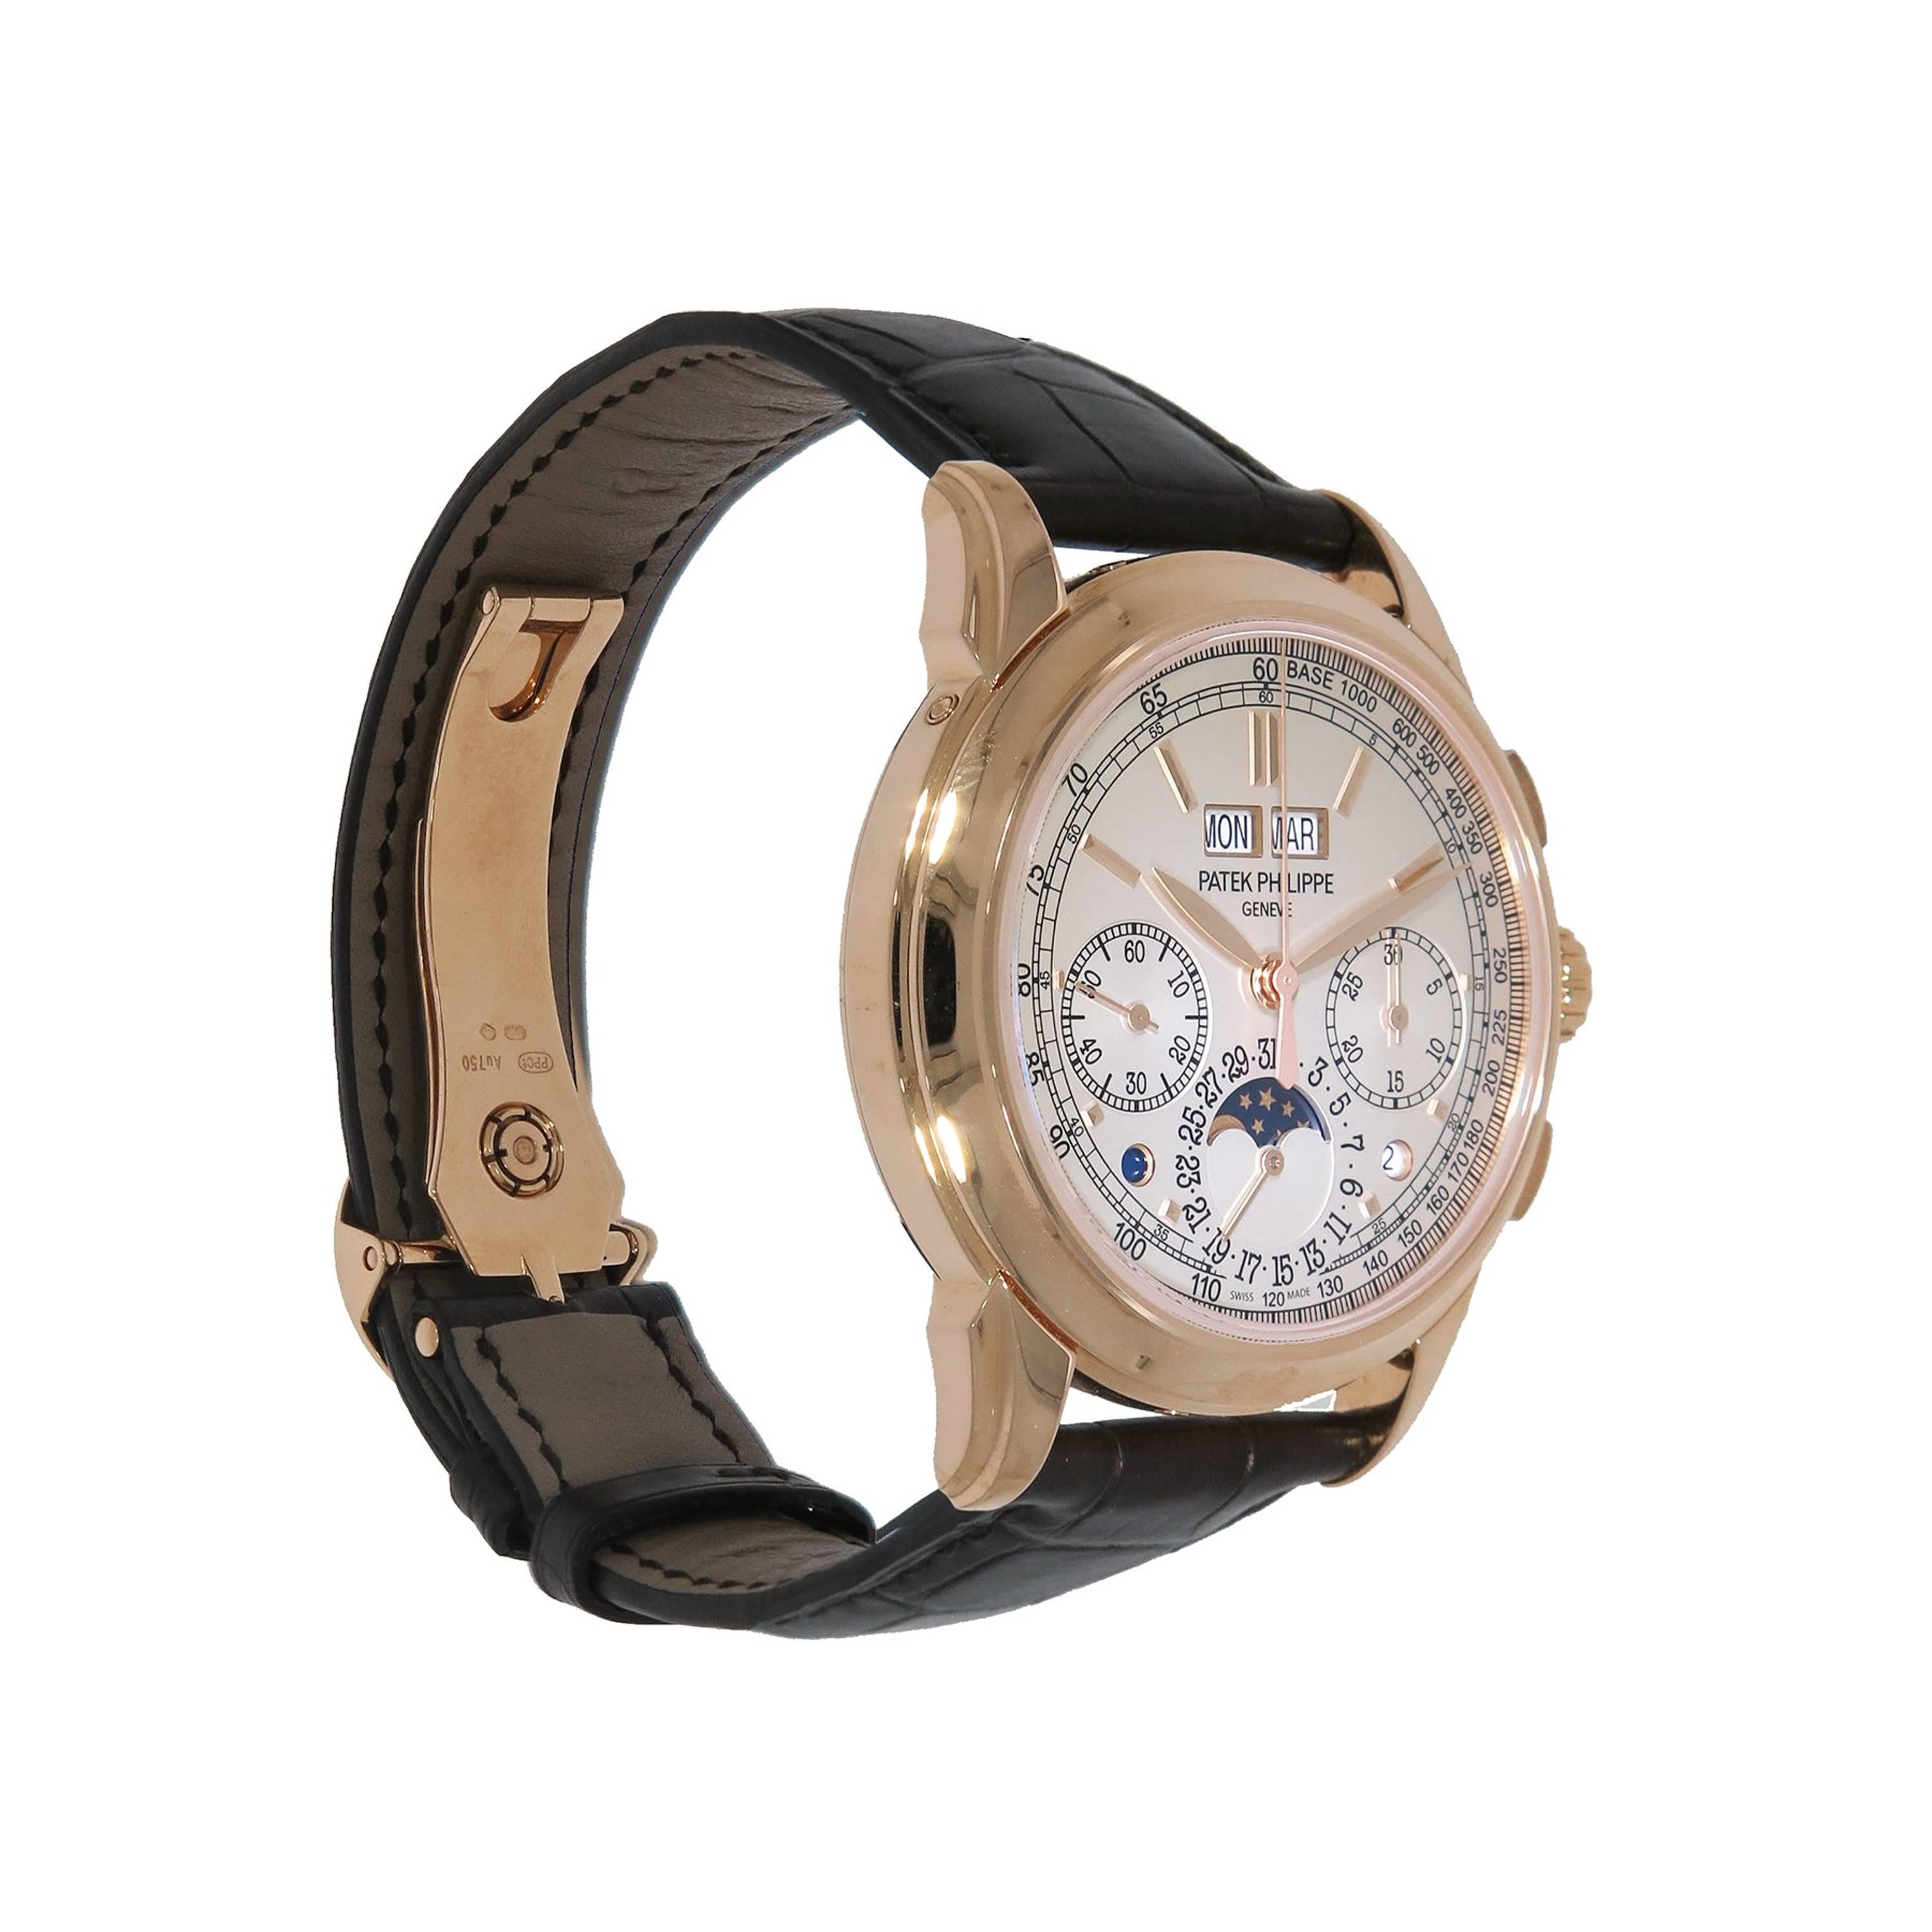 Patek Philippe Perpetual Chronograph crafted in 18k rose gold.  
This timepiece features a manually wound movement (caliber CH 29-535 PS Q)  with indications for the Hours, Minutes, Seconds, Day, Date, Month, Lunar Cycle, Day/Night, Leap Year and